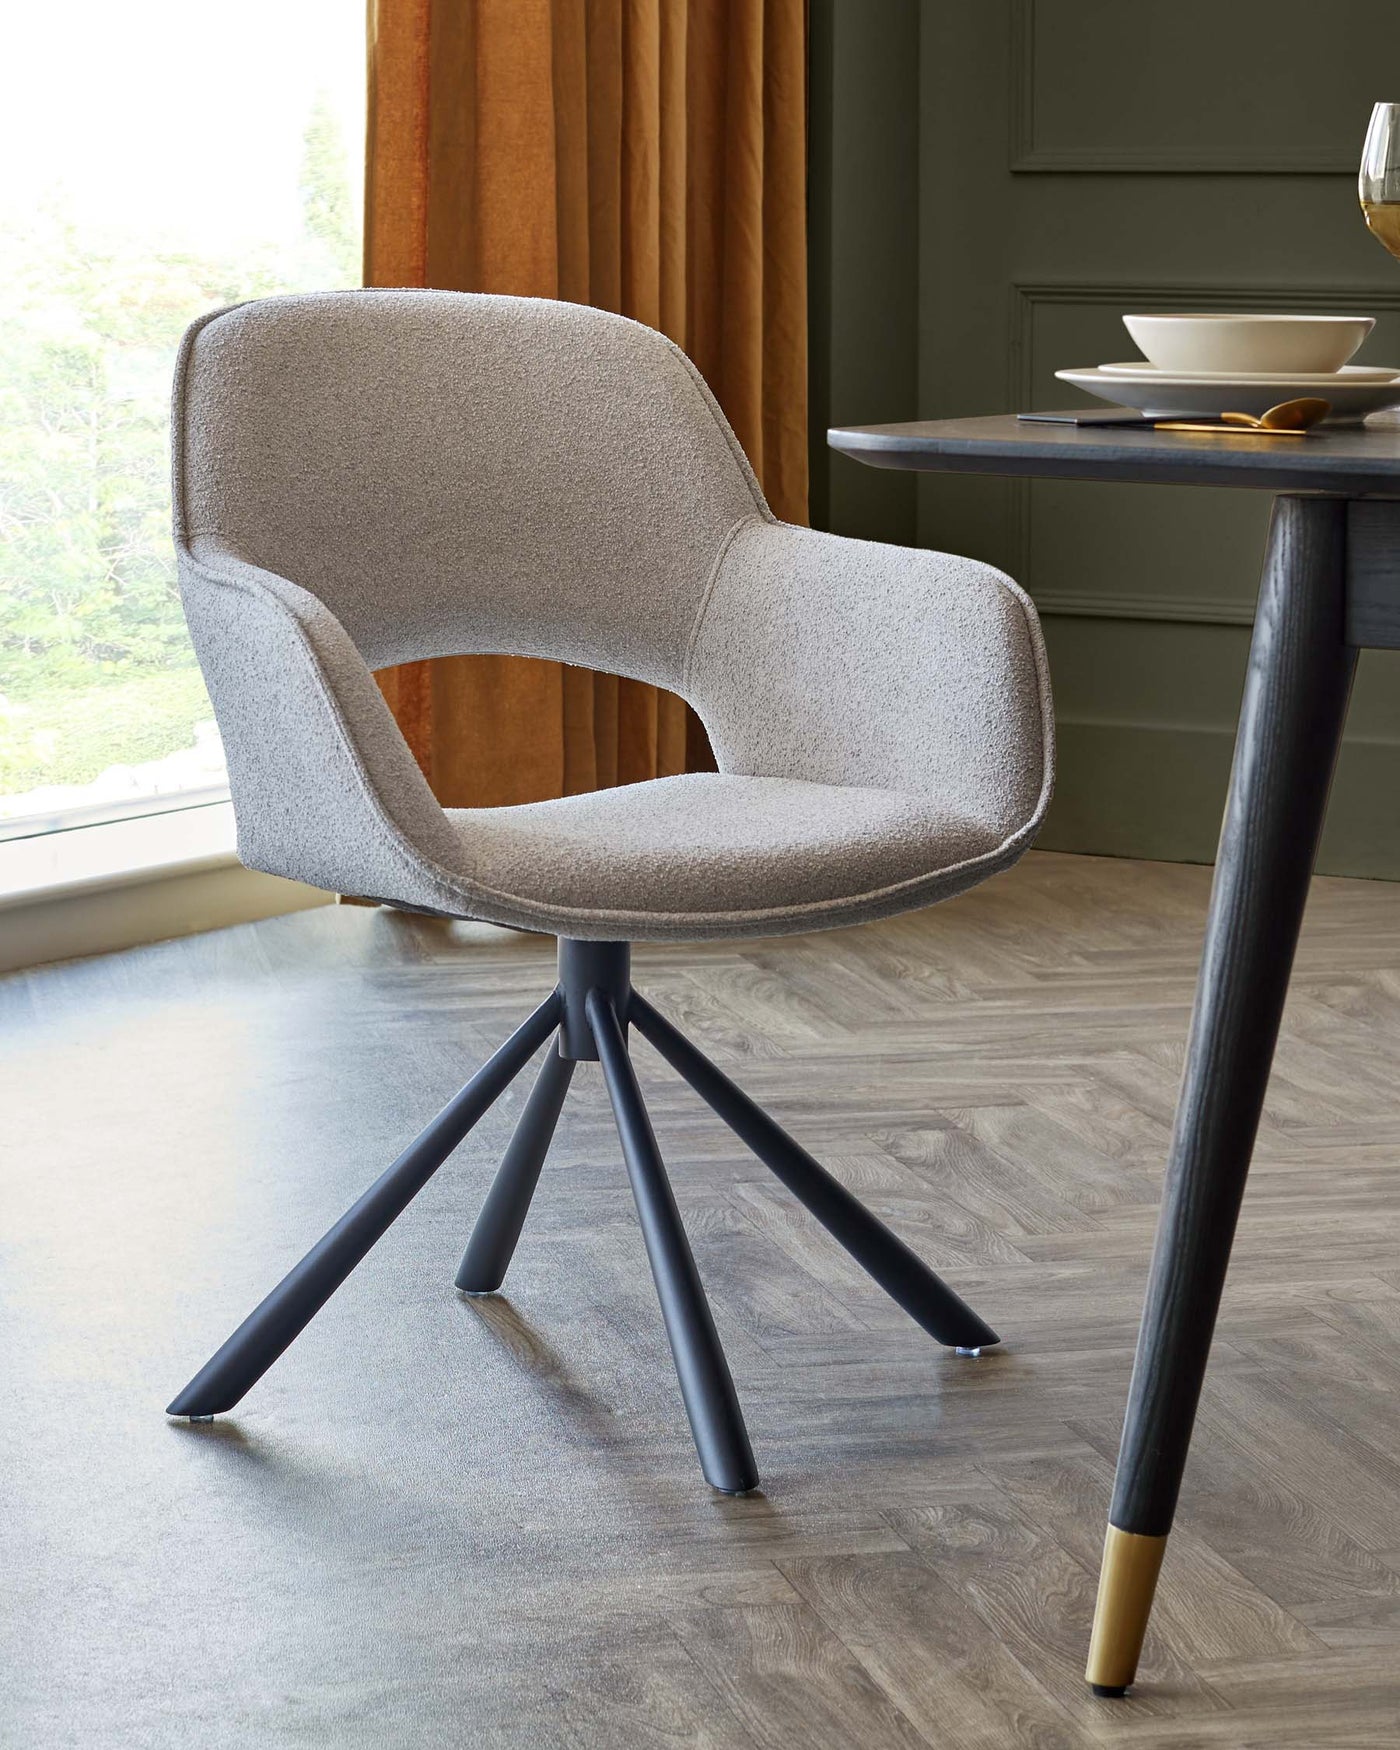 Modern upholstered dining chair with a curved backrest and a swivel base featuring four angled legs. The chair has a light grey textured fabric and matte black legs with contrasting metallic tips. Part of a round wooden dining table with a black finish is visible, set with a bowl and plate on top.